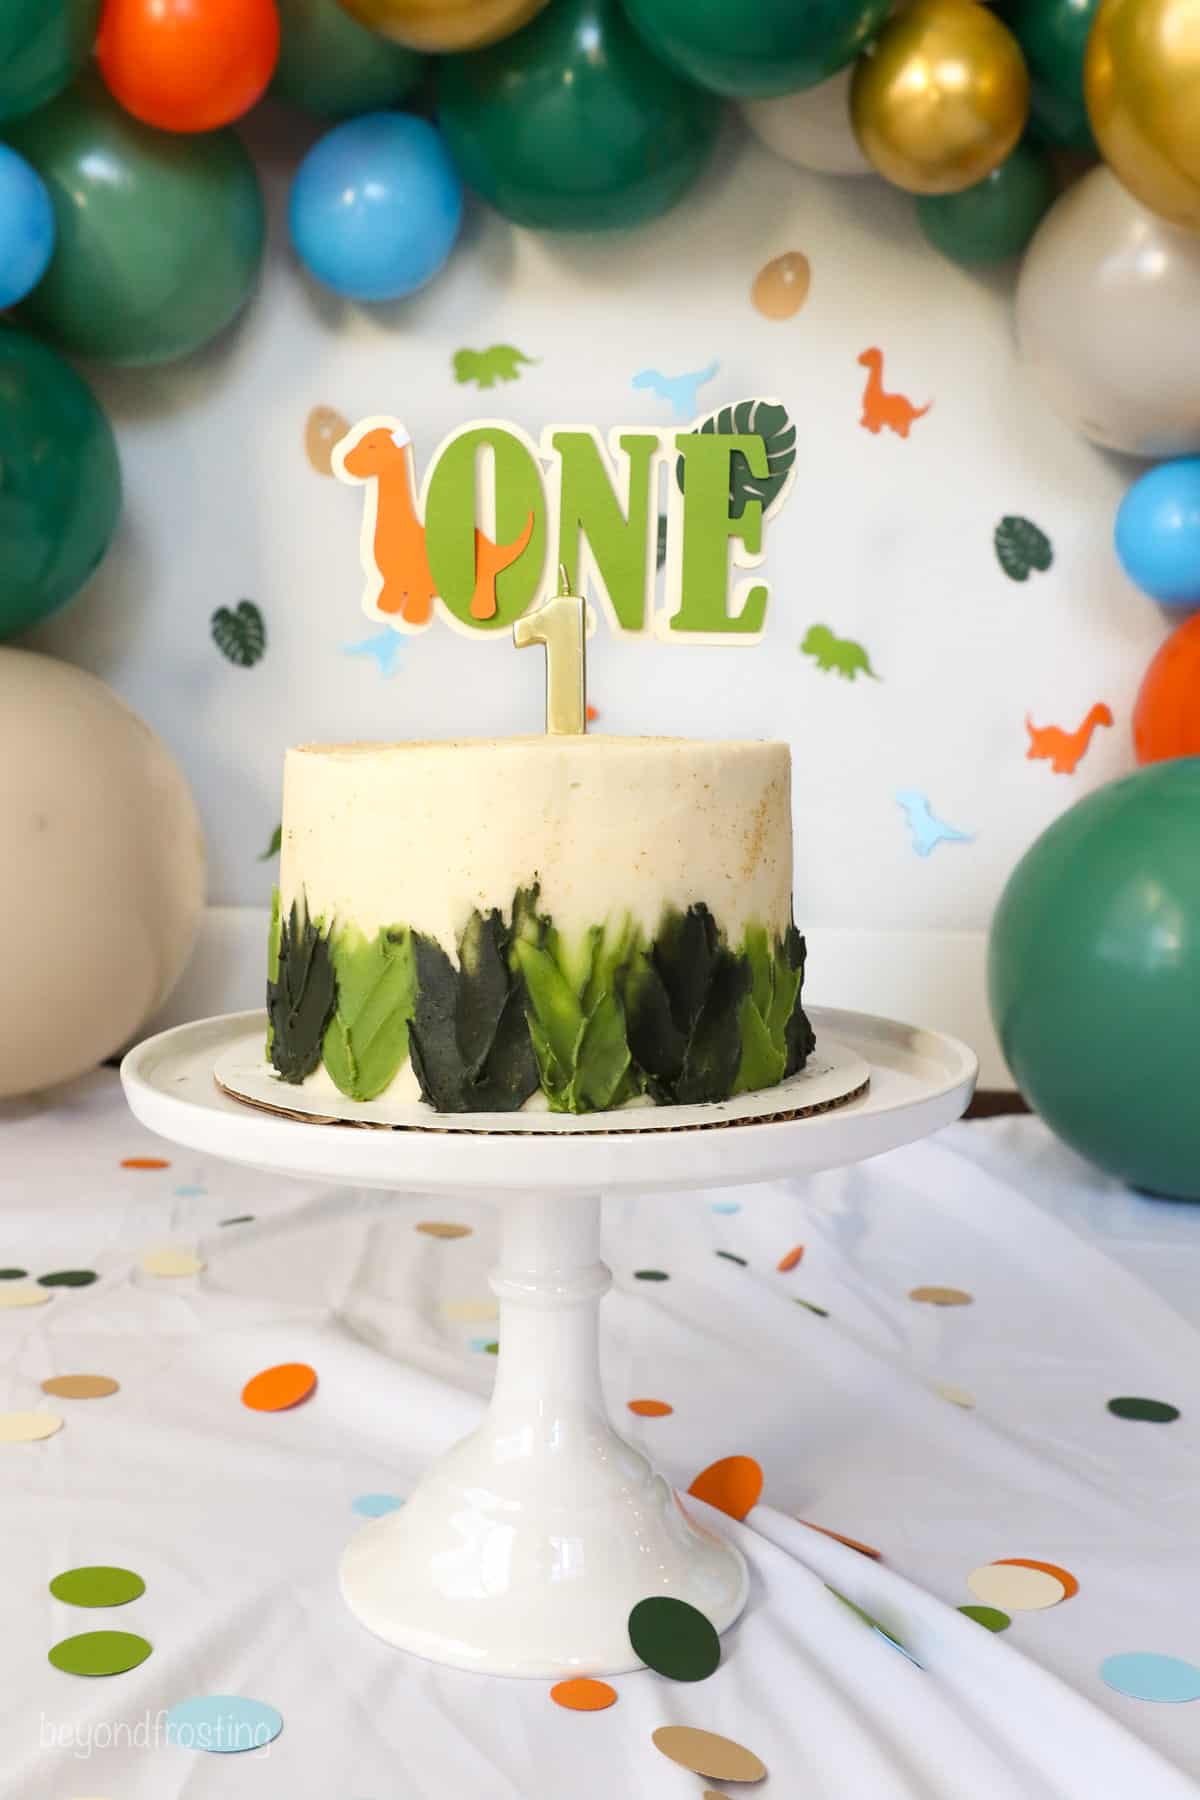 Full shot of a decorated dinosaur cake on a cake stand surrounded by confetti and a birthday hat, framed by a balloon arch in the background.